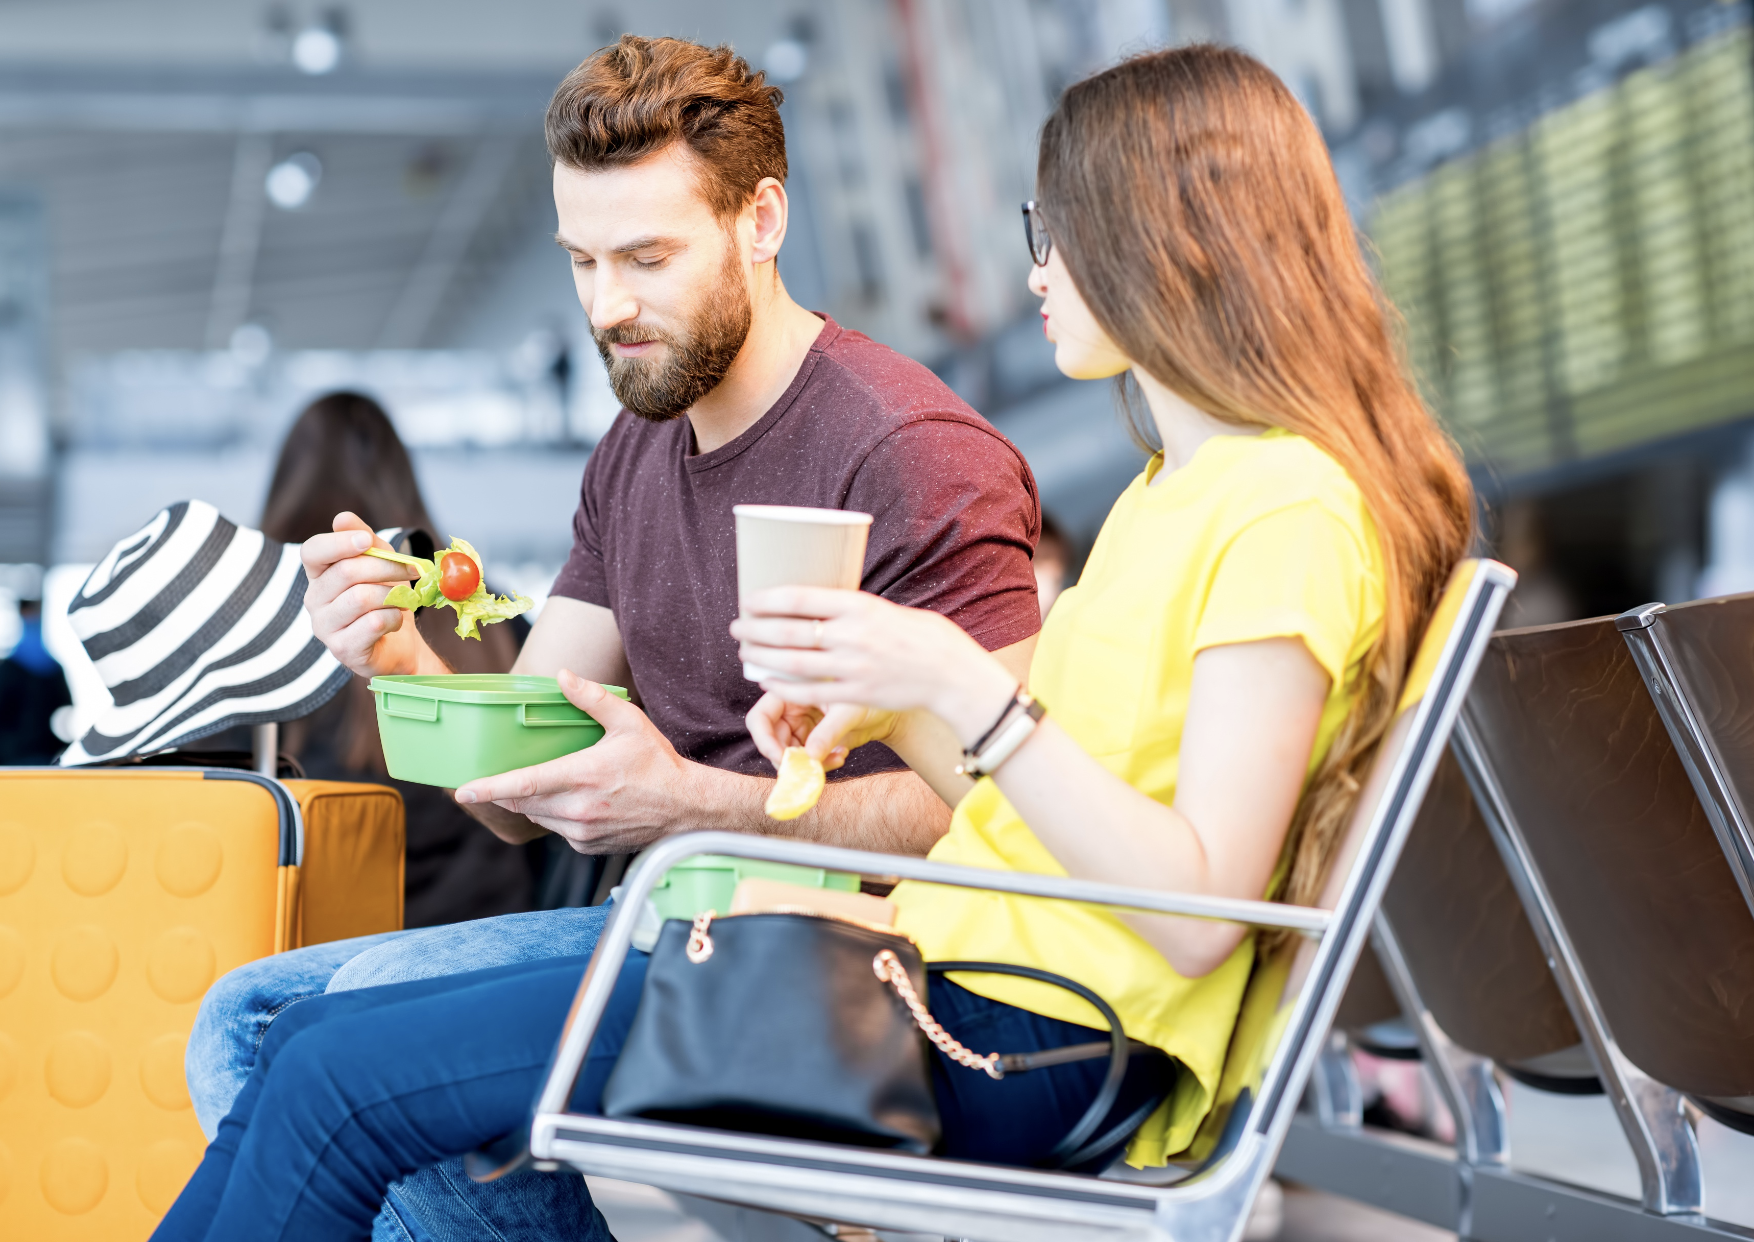 Young couple having a snack with lunch boxes in a airport.